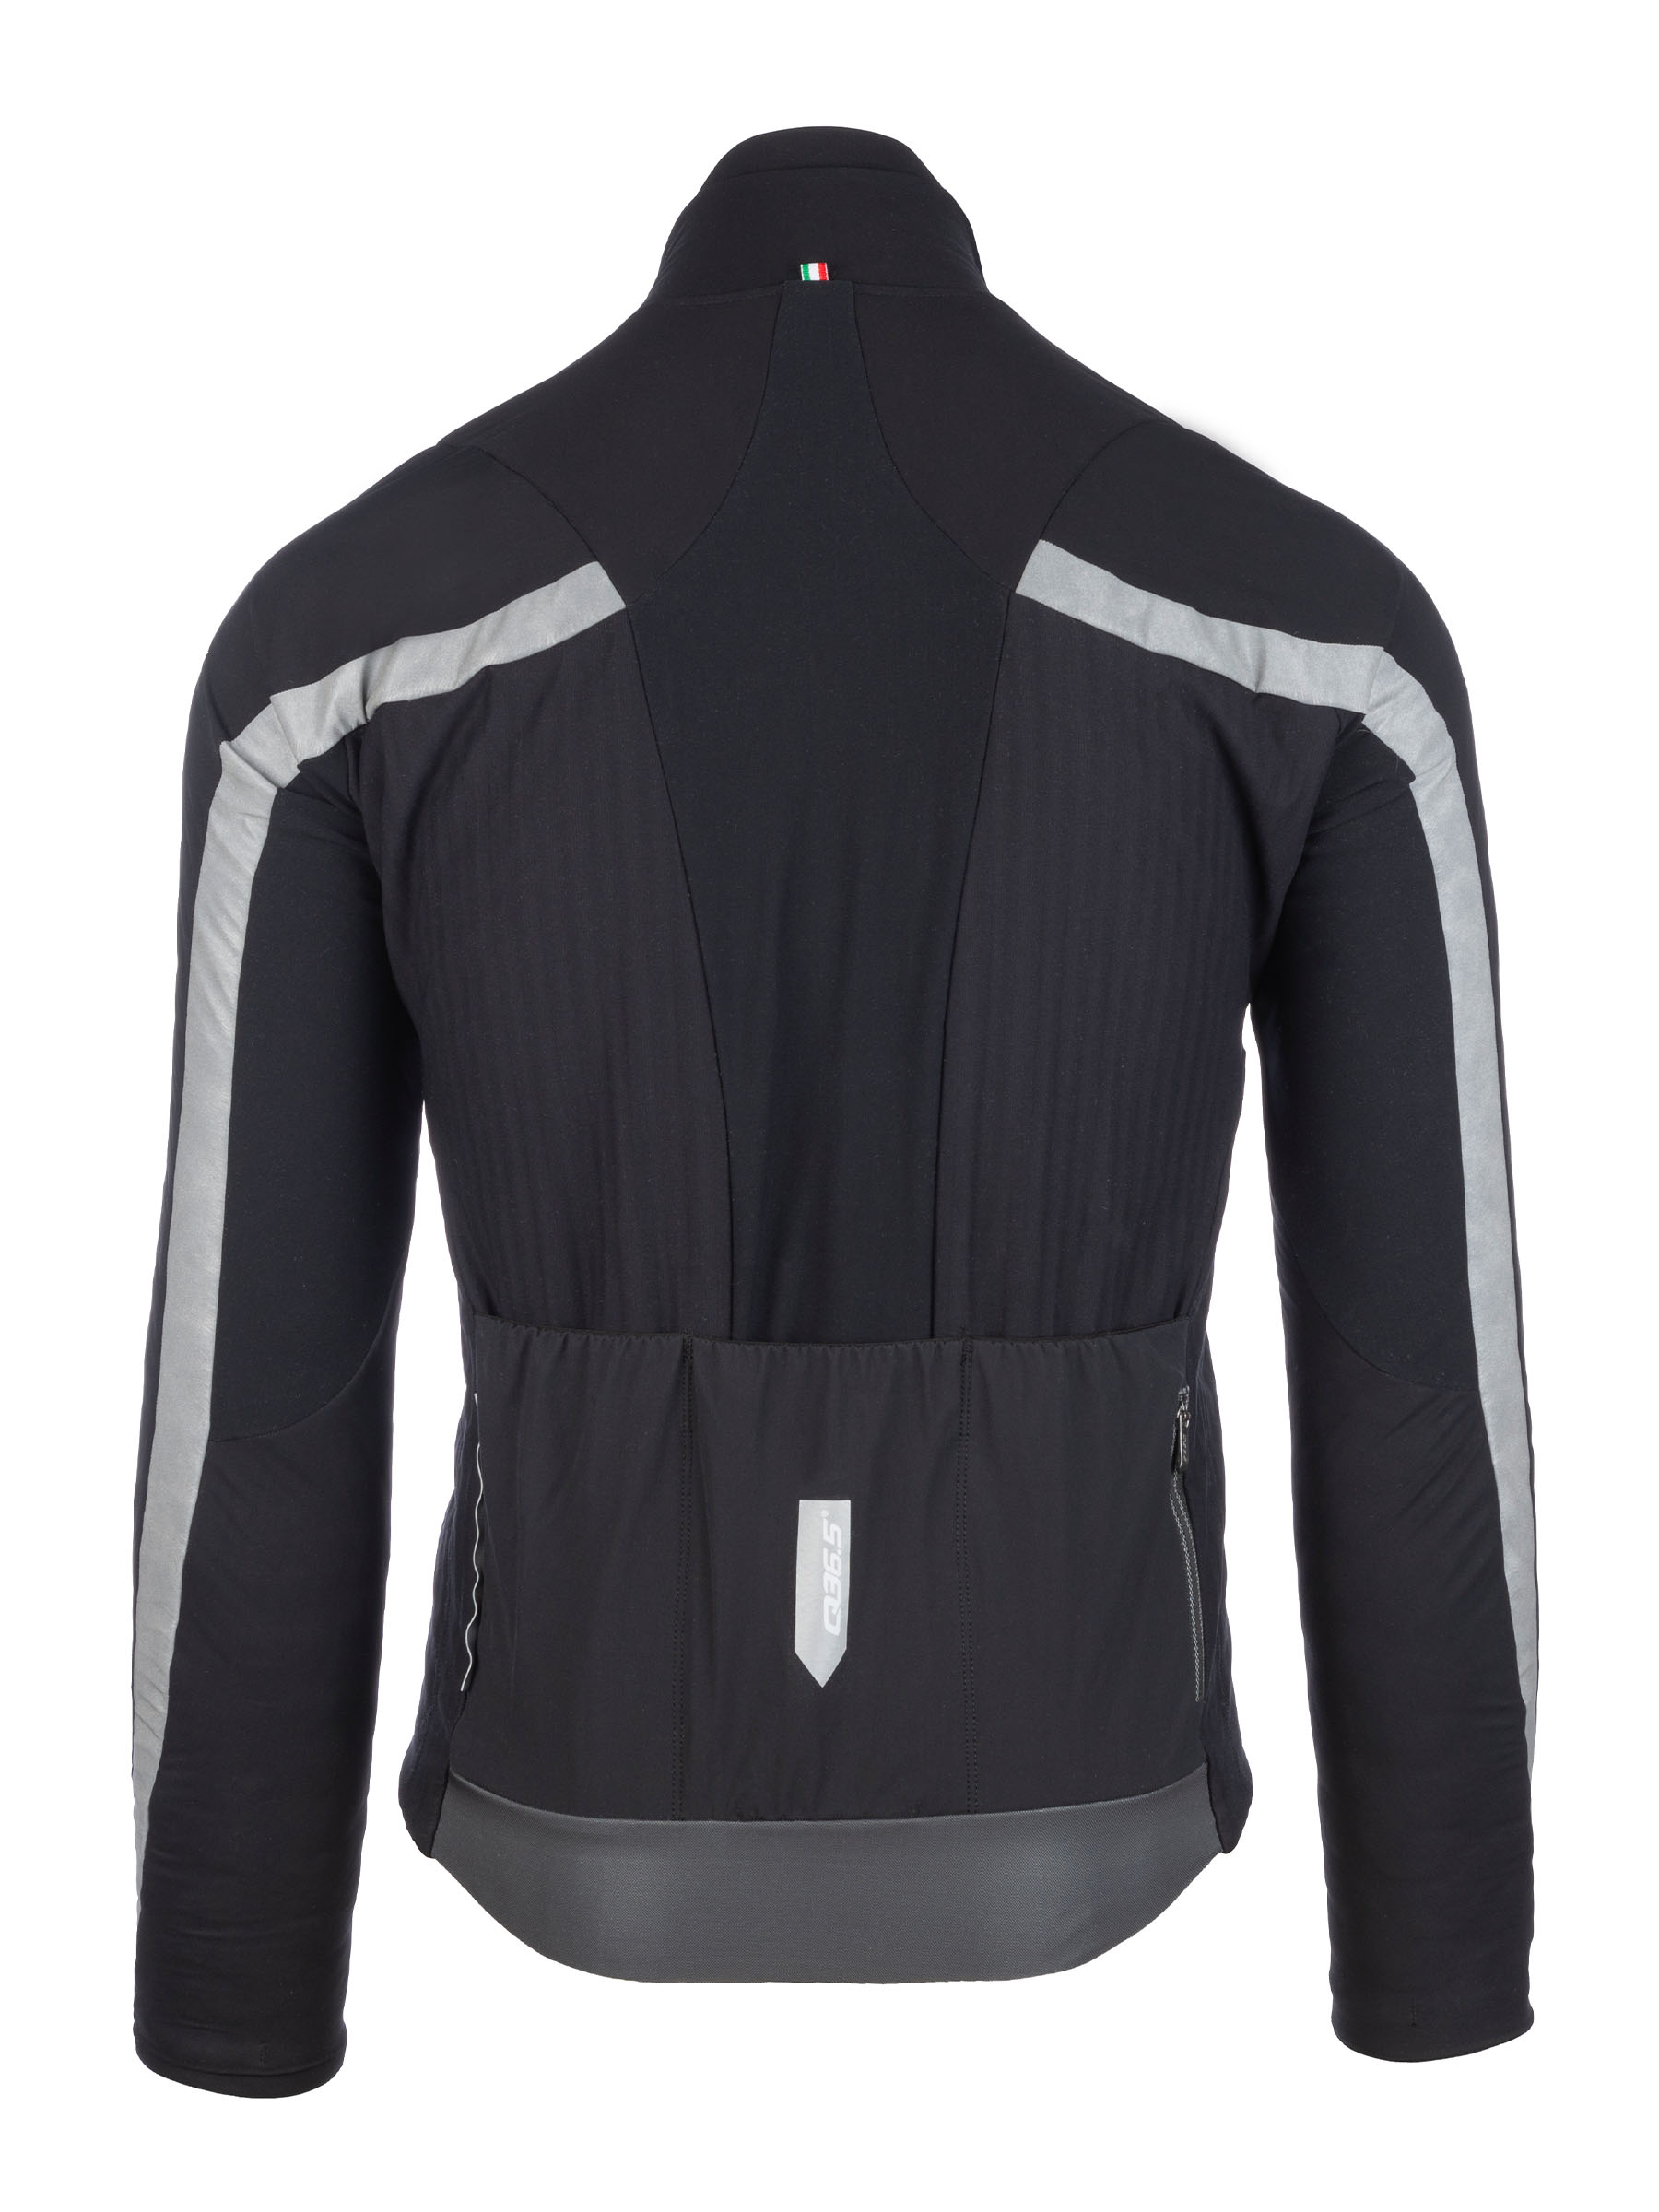 Interval Termica Jacket black, mens cycling thermal jacket for winter • | Hemden